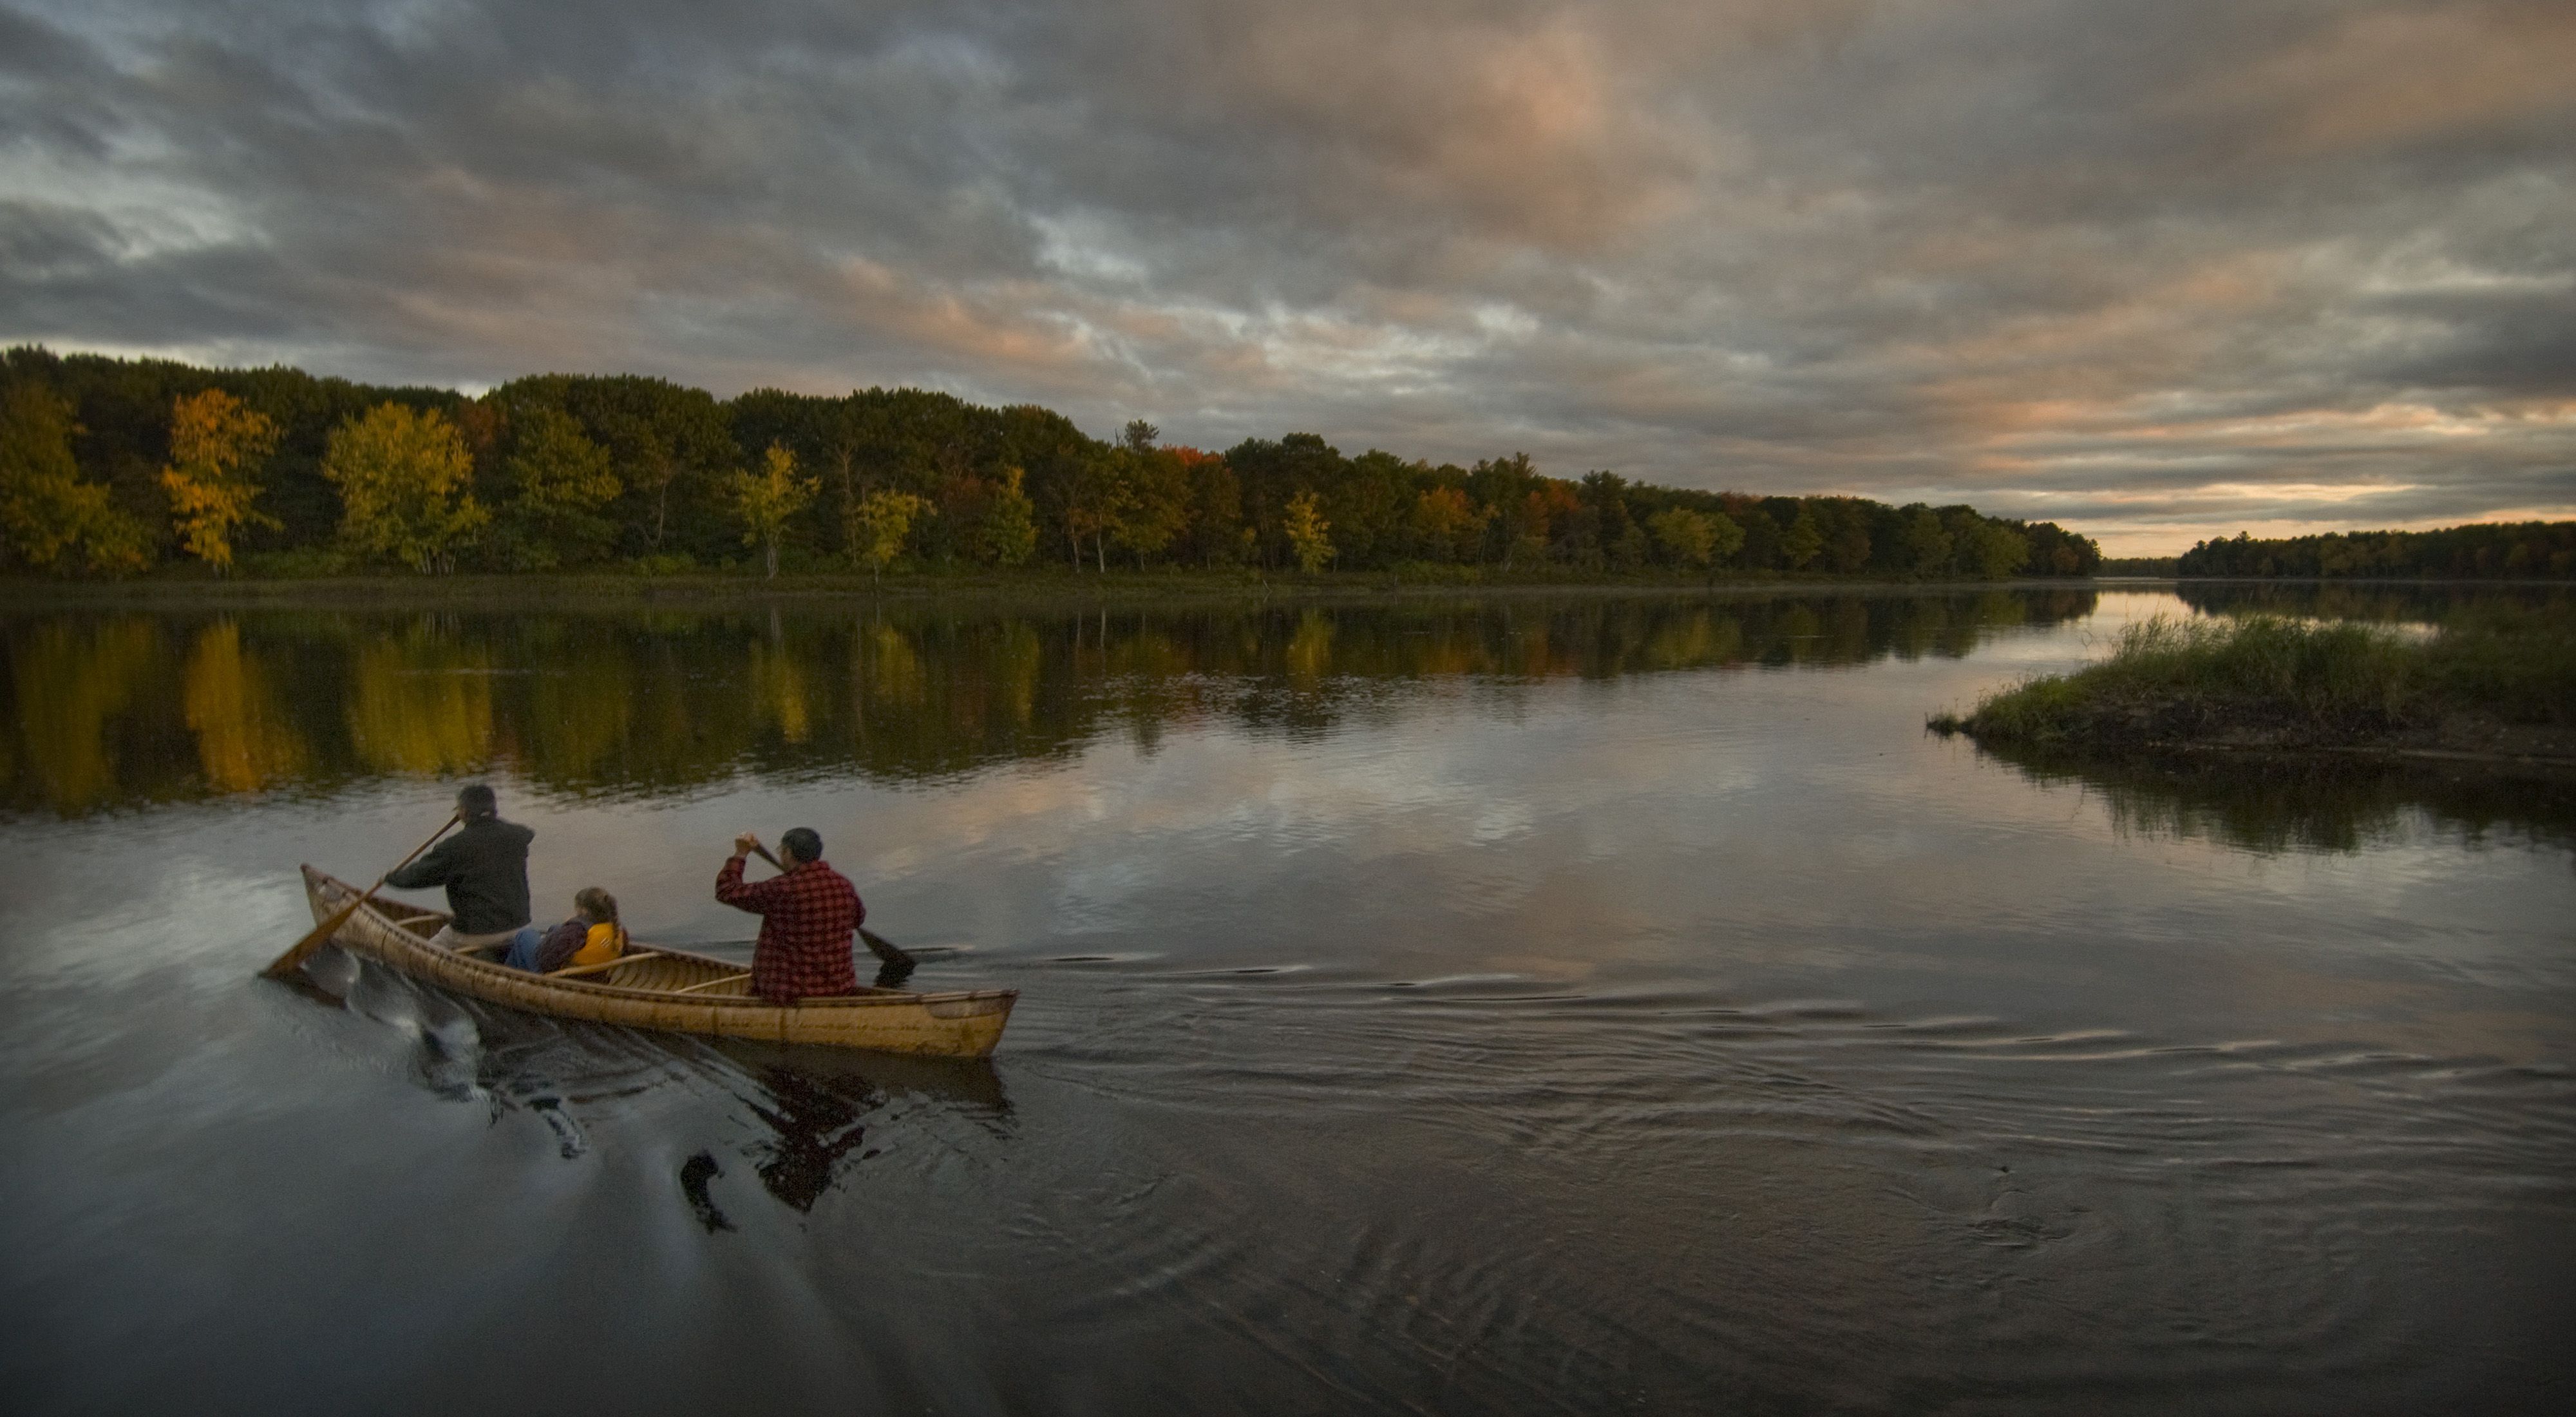 A family paddles across the Penobscot River in a birch canoe at sunset.